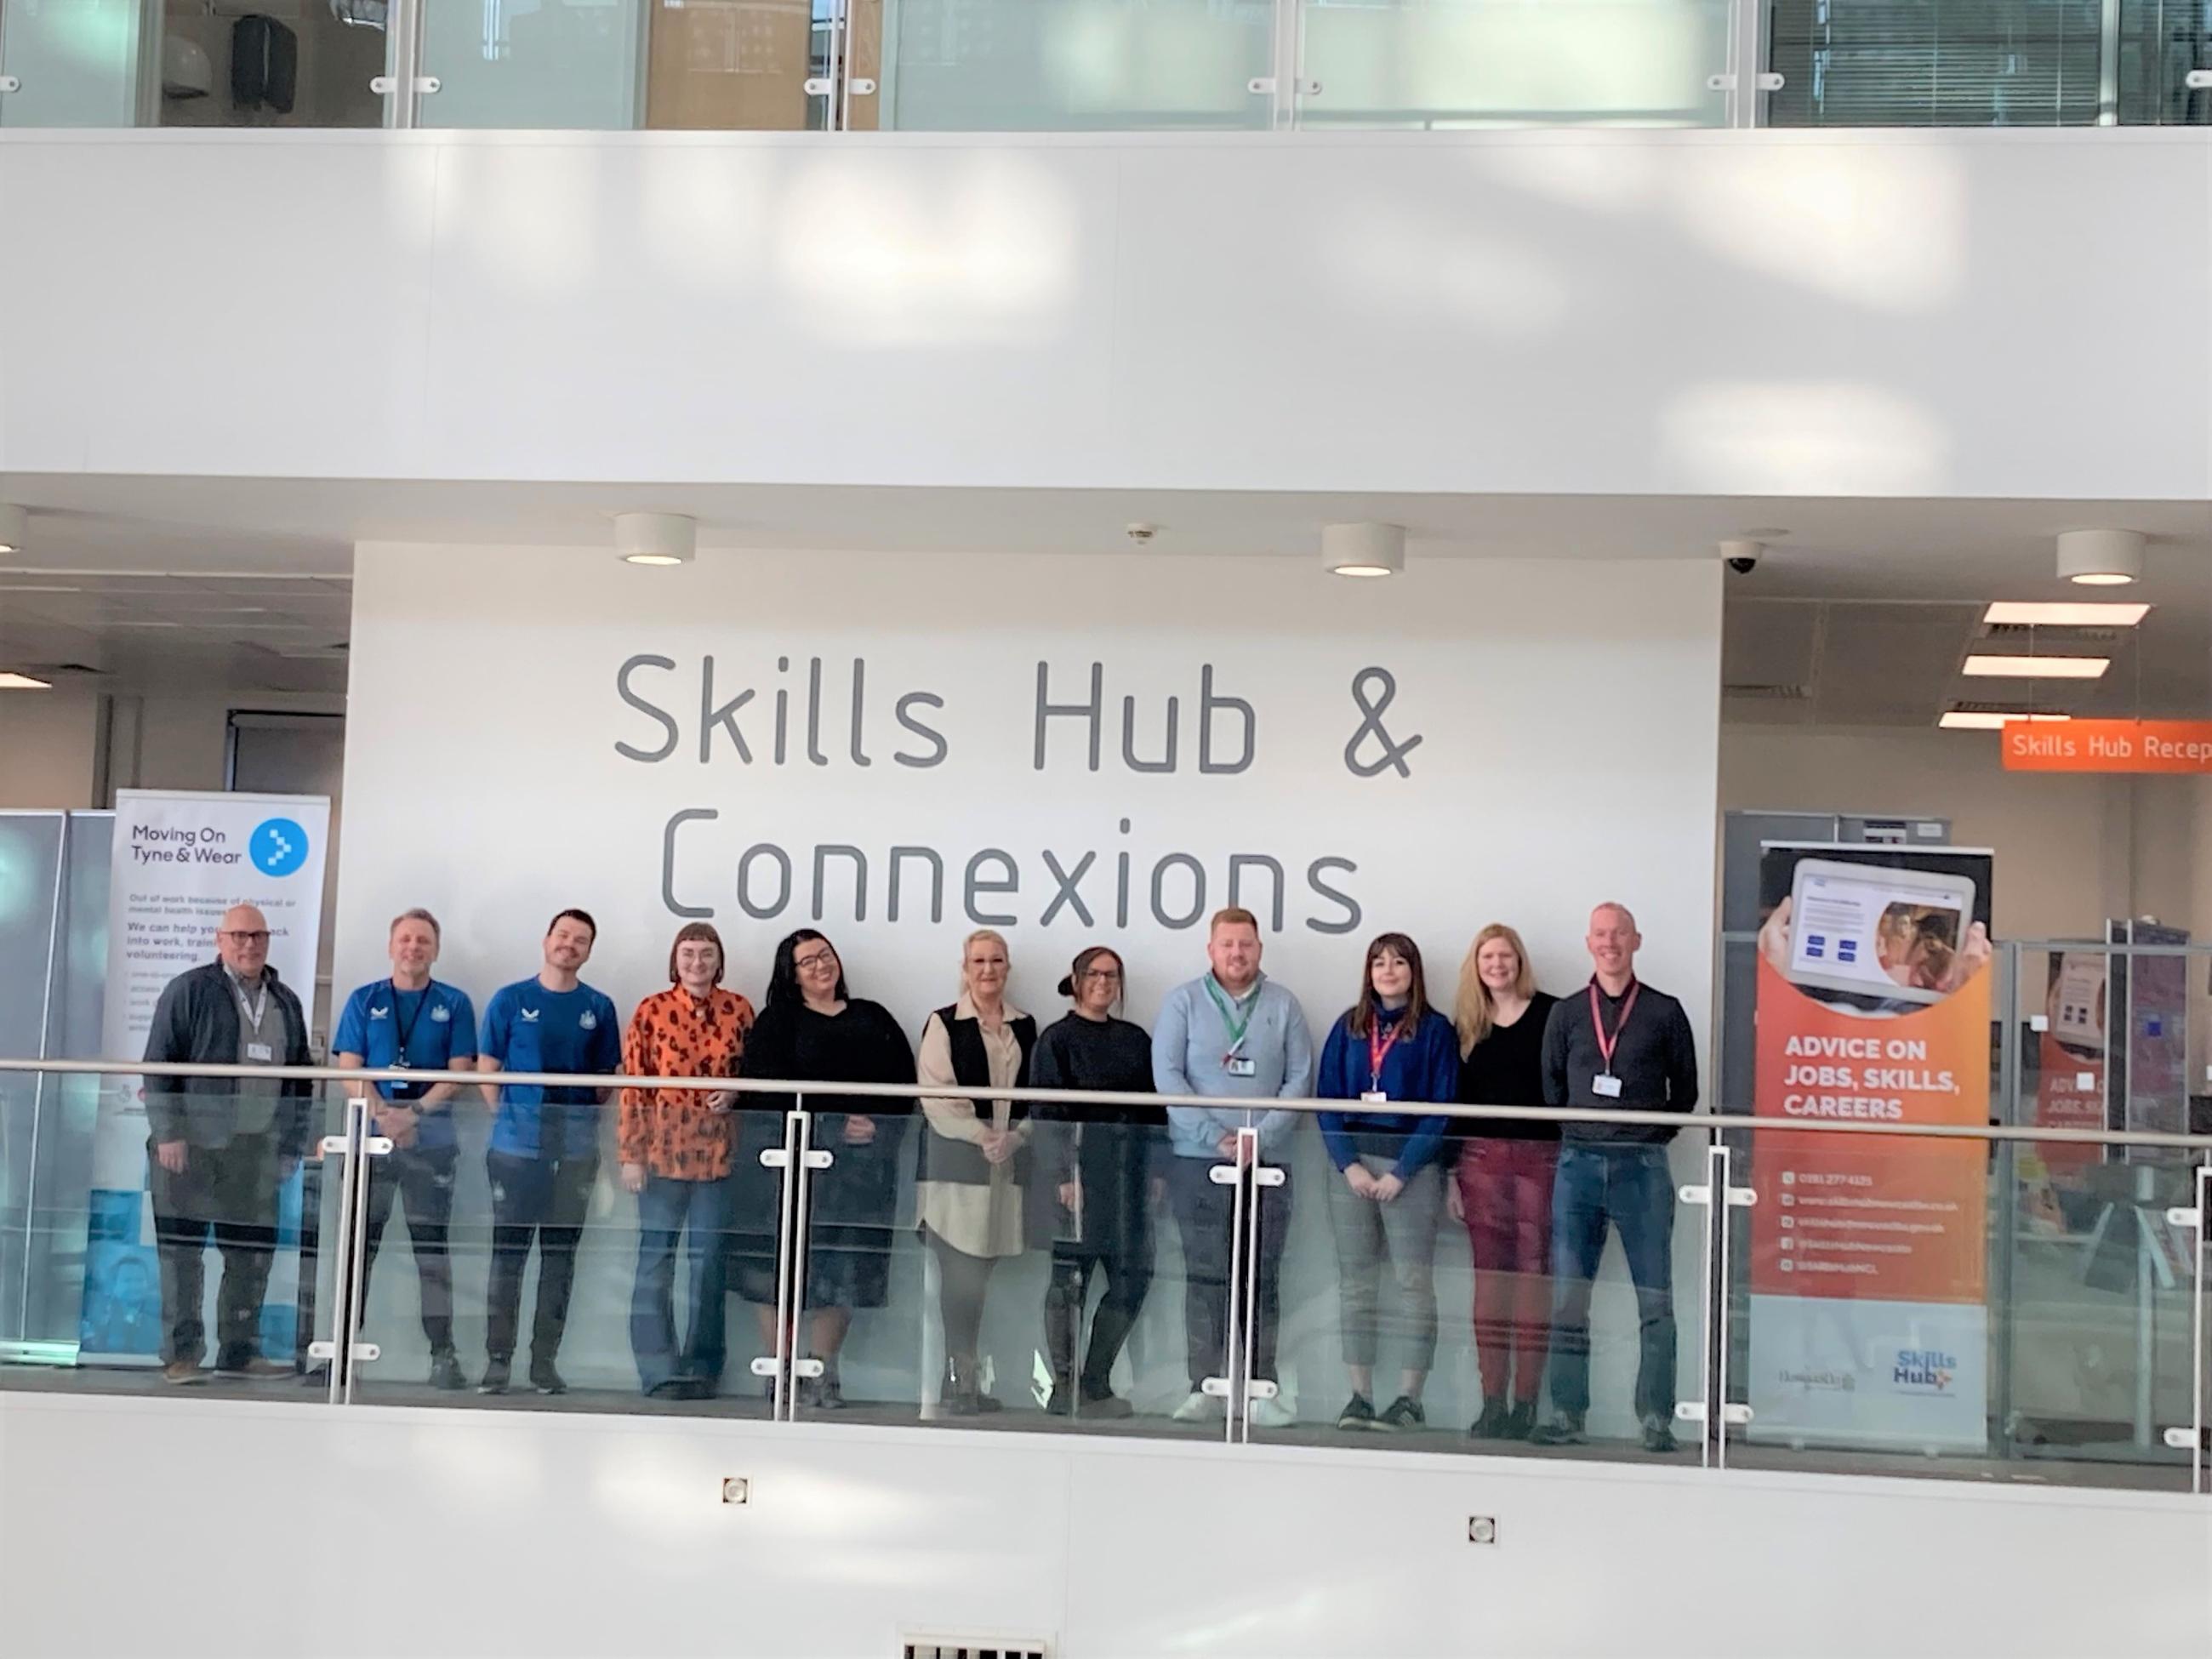 The Skills Hub plays a vital role in supporting people to move closer to the world of work